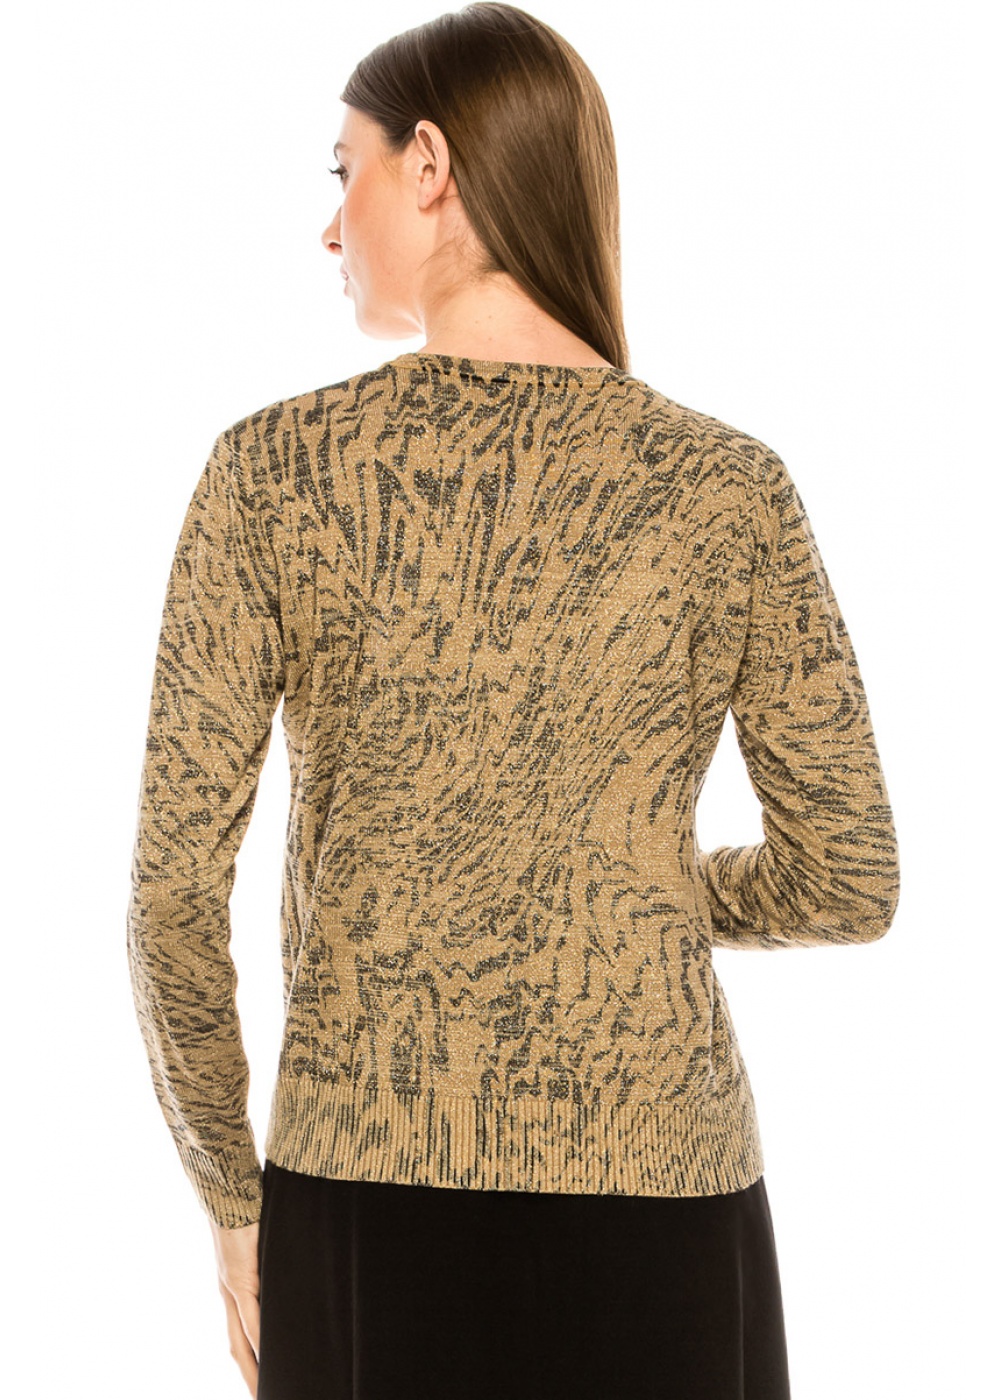 Gold lurex sweater with an abstract wavy pattern